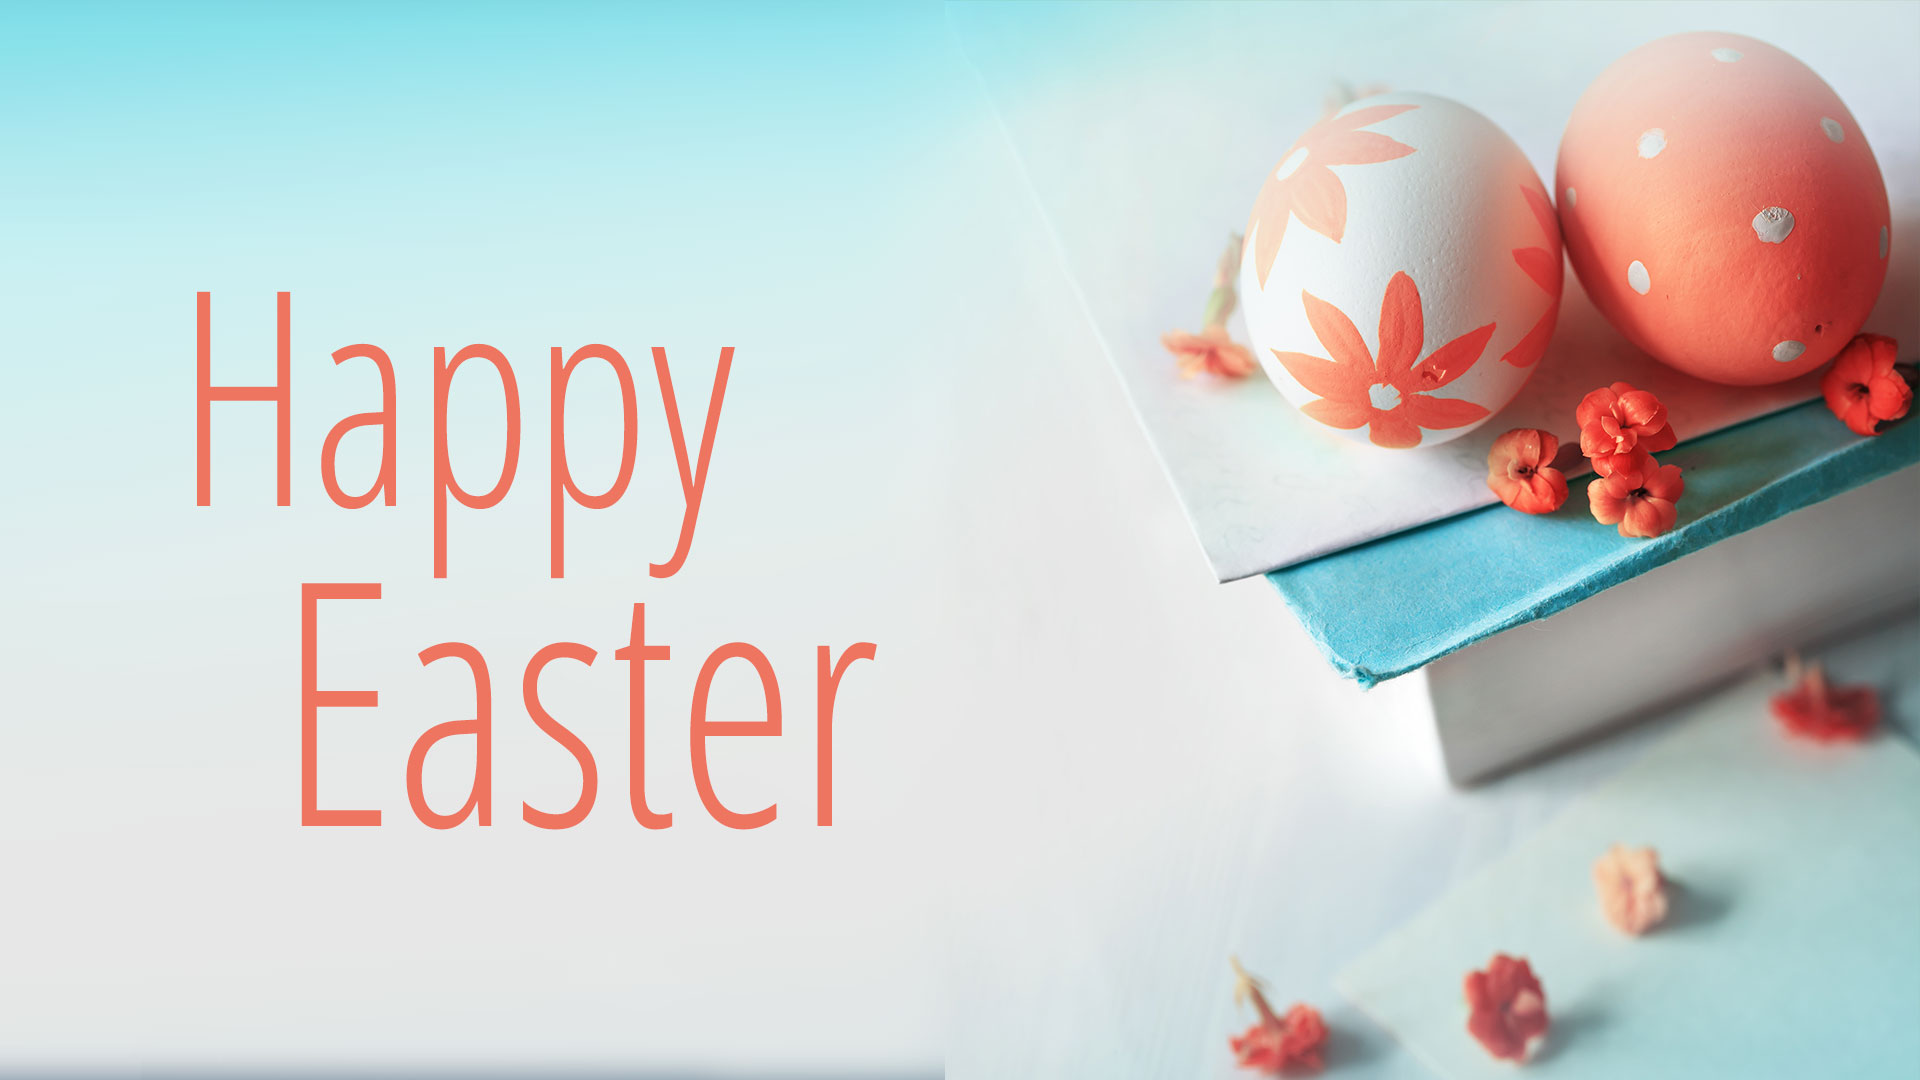 Free Graphic | Holidays | Easter